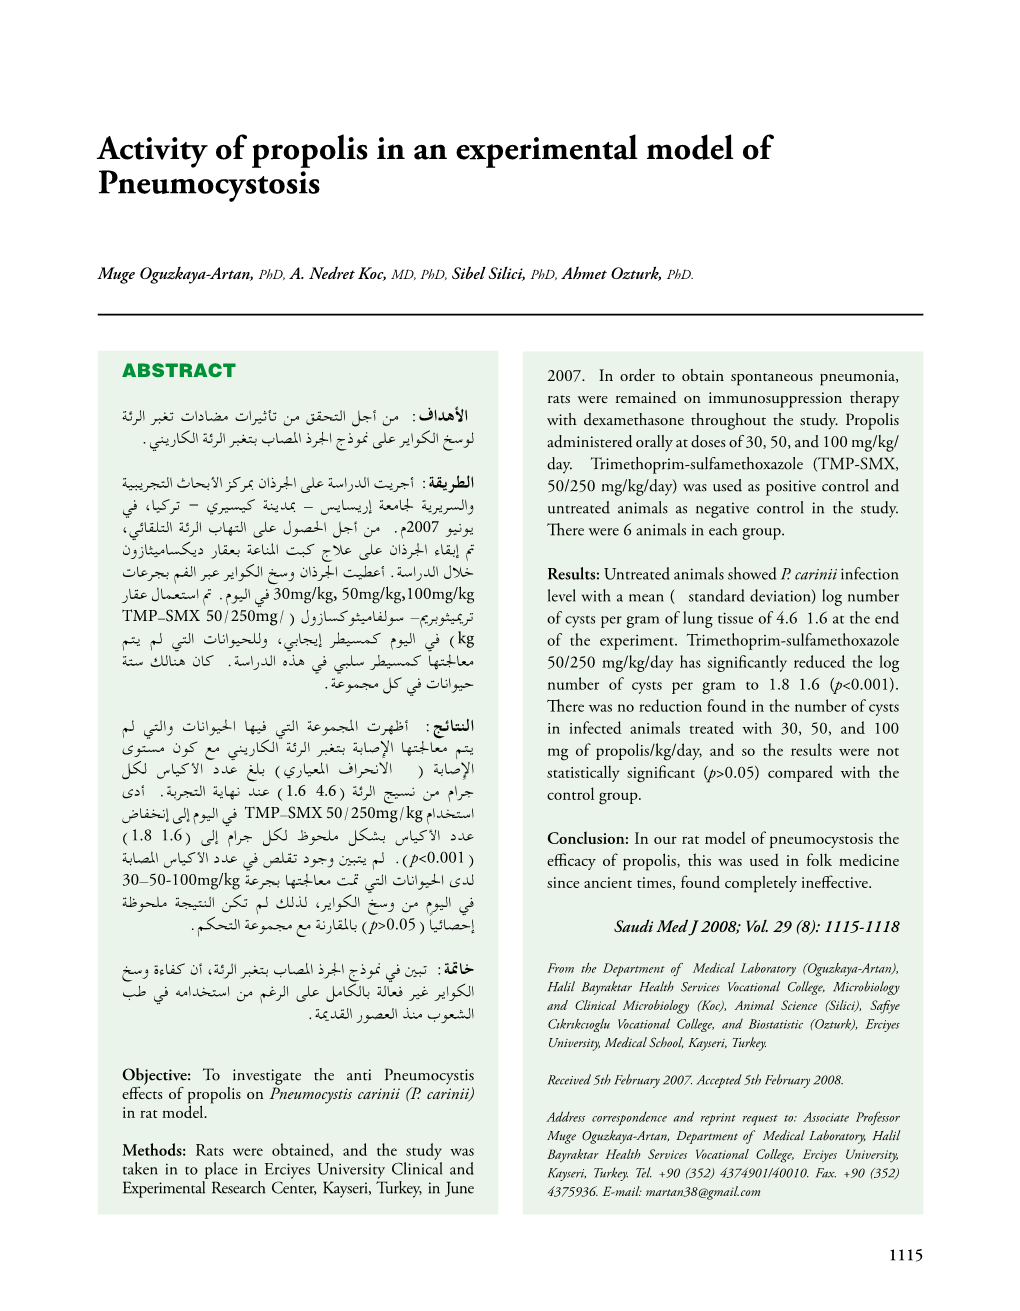 Activity of Propolis in an Experimental Model of Pneumocystosis